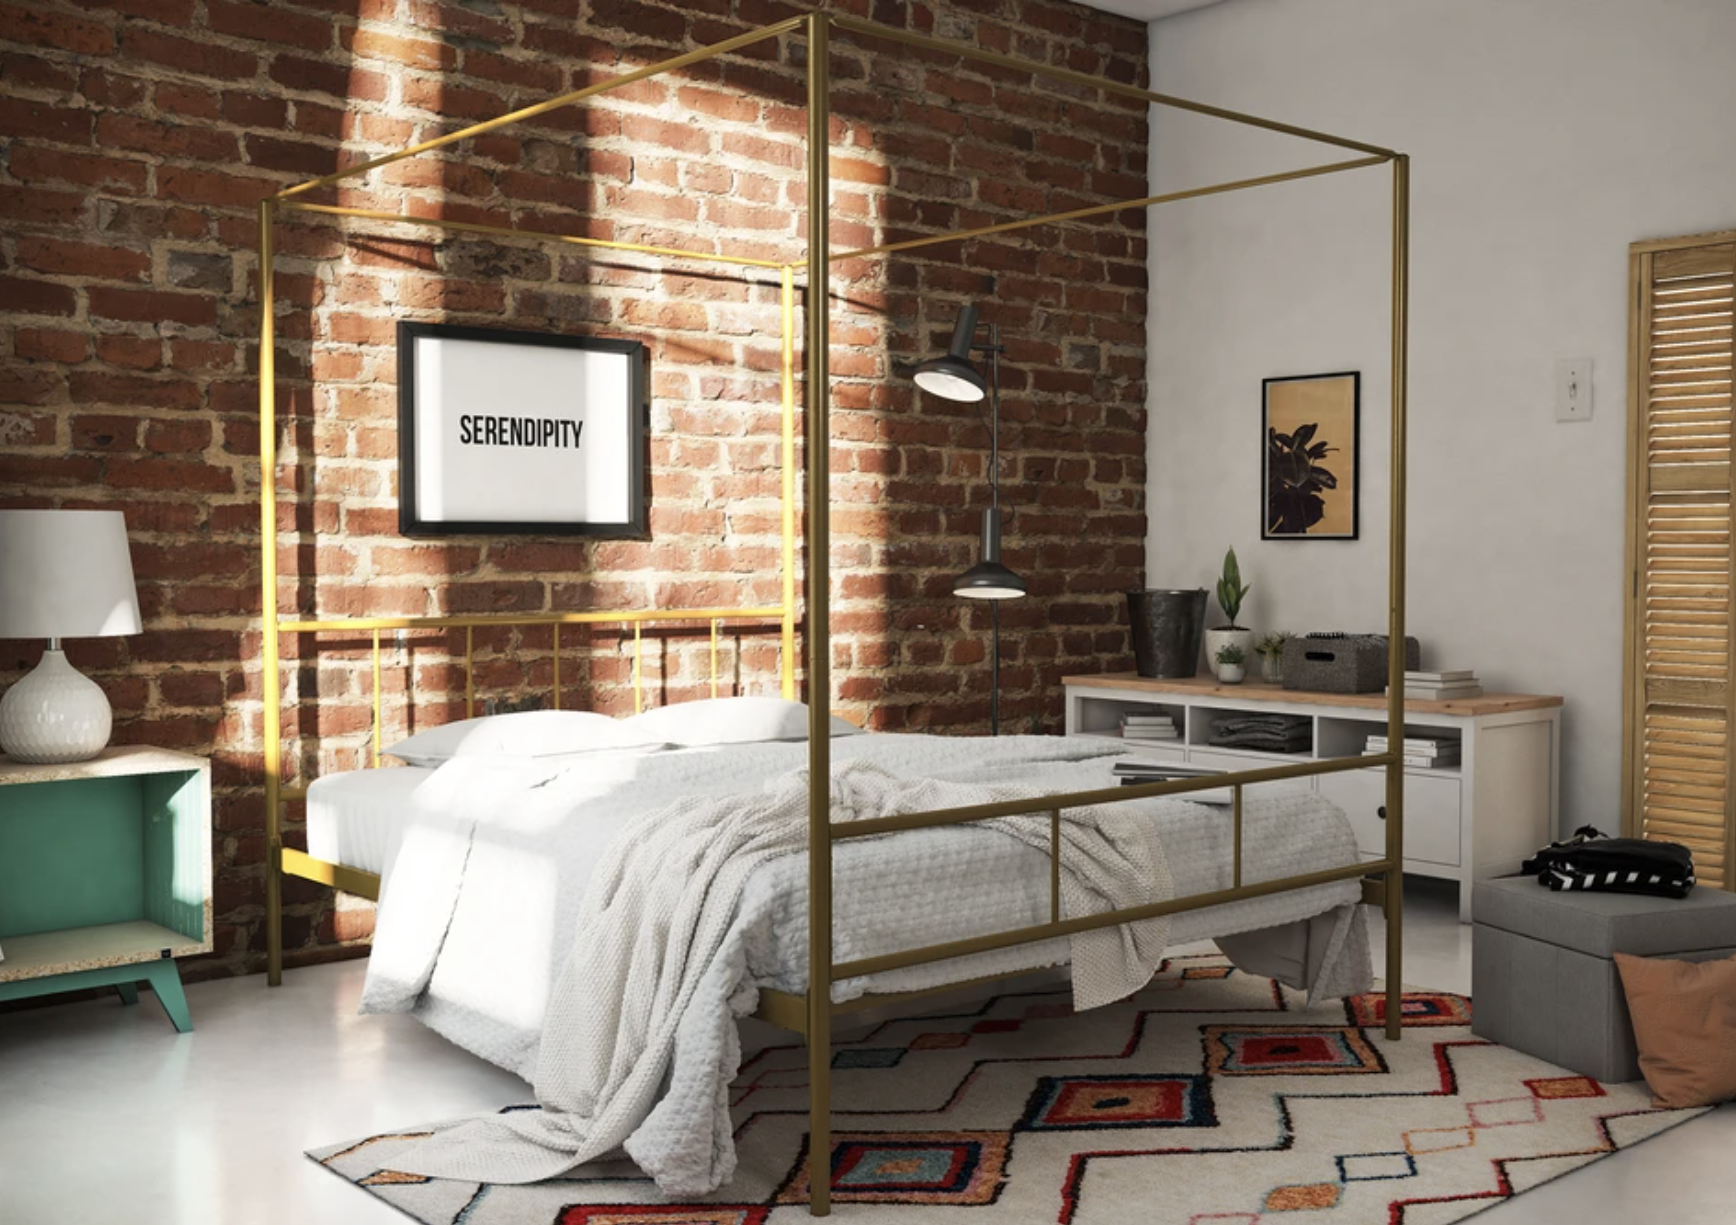 The bed frame in gold is in a bedroom